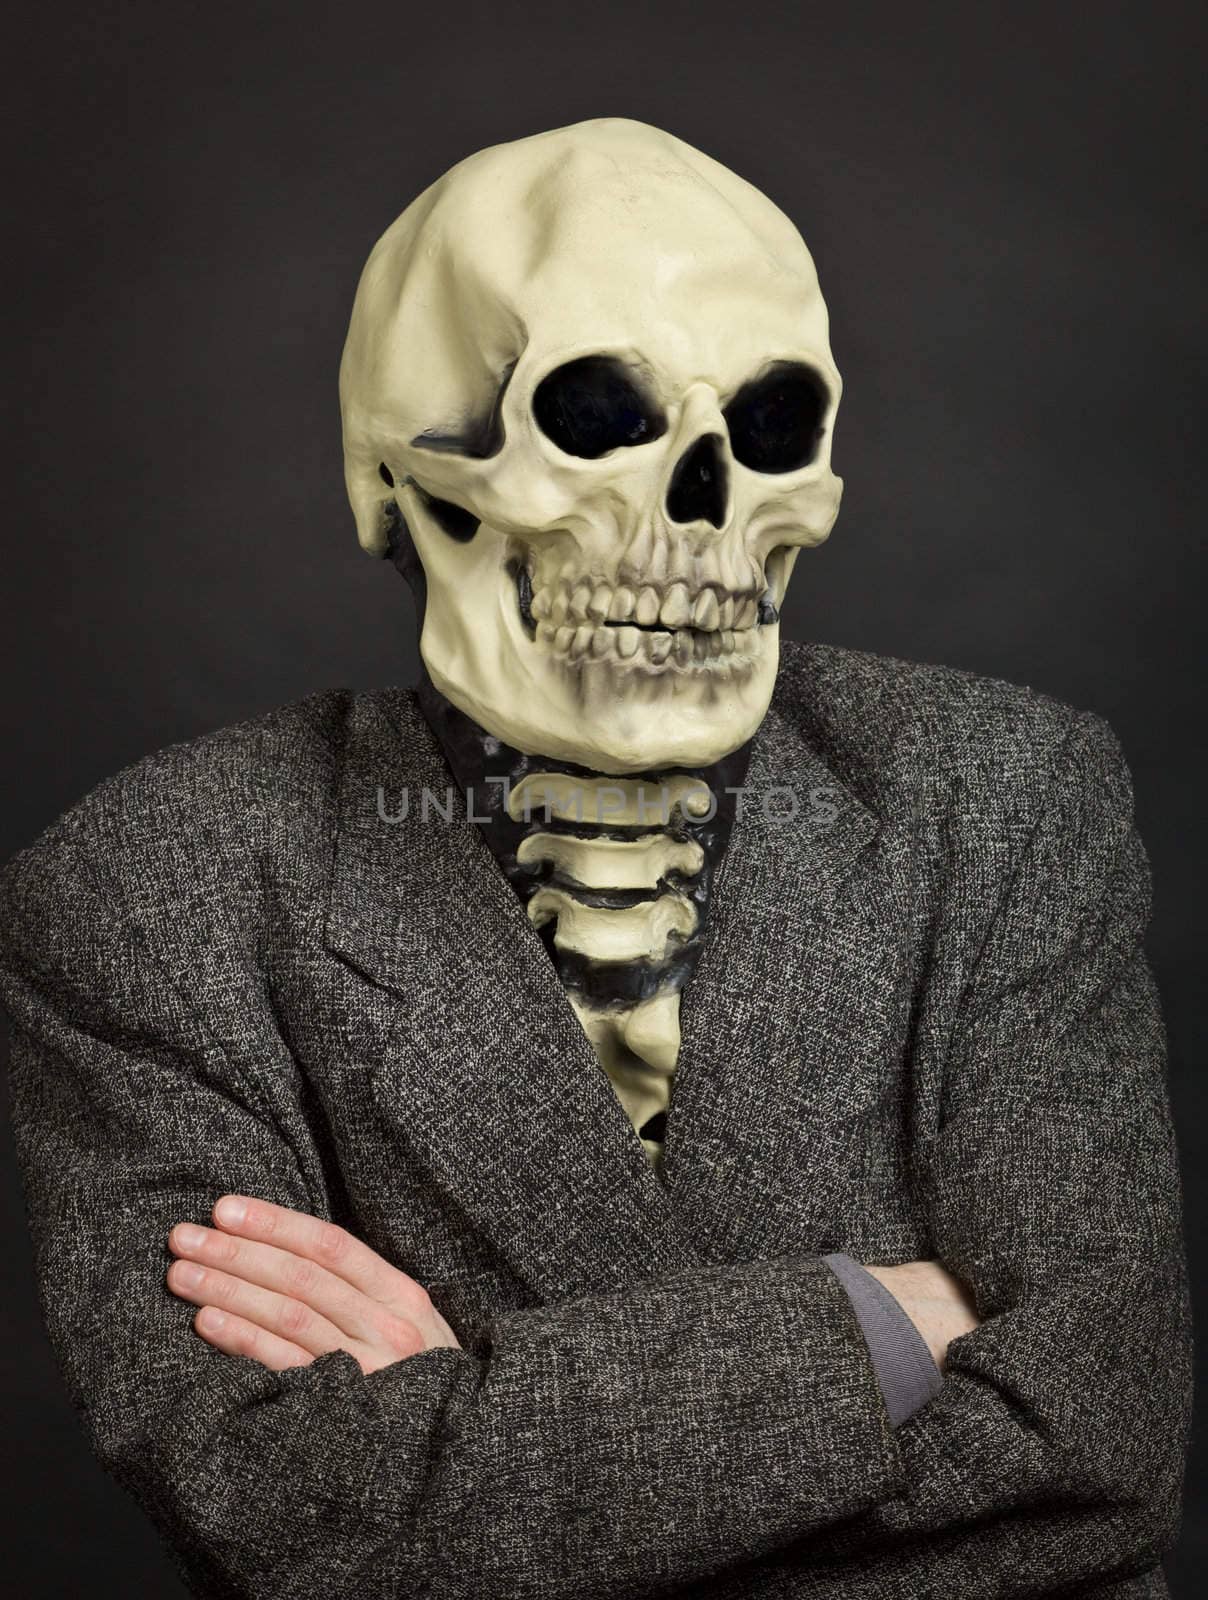 Portrait of the person in a skeleton mask against a dark background